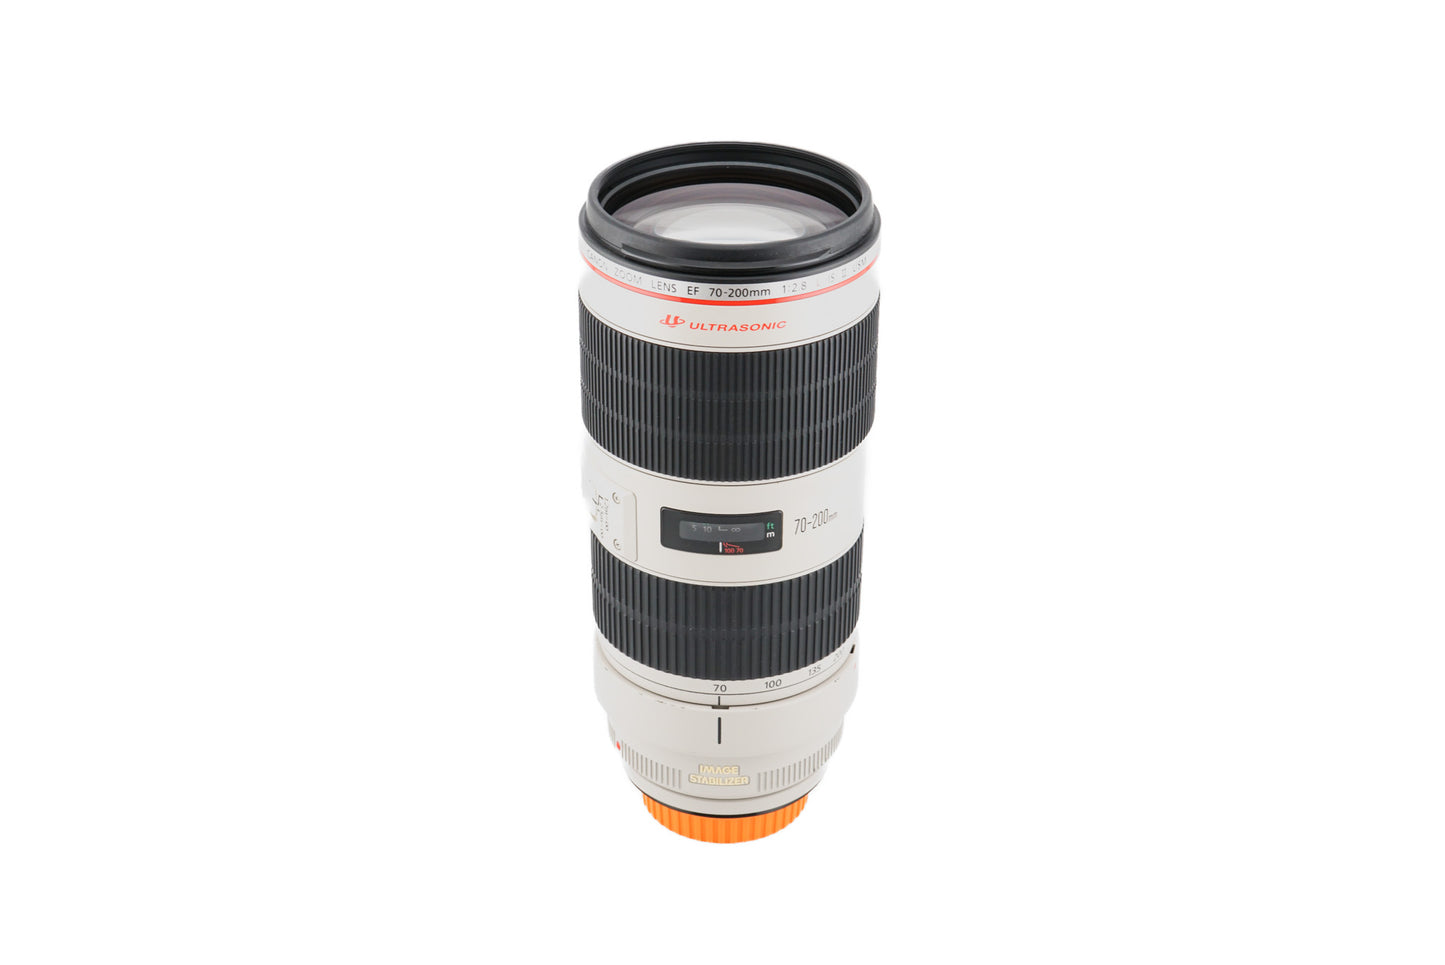 Canon 70-200mm f2.8 L IS II USM